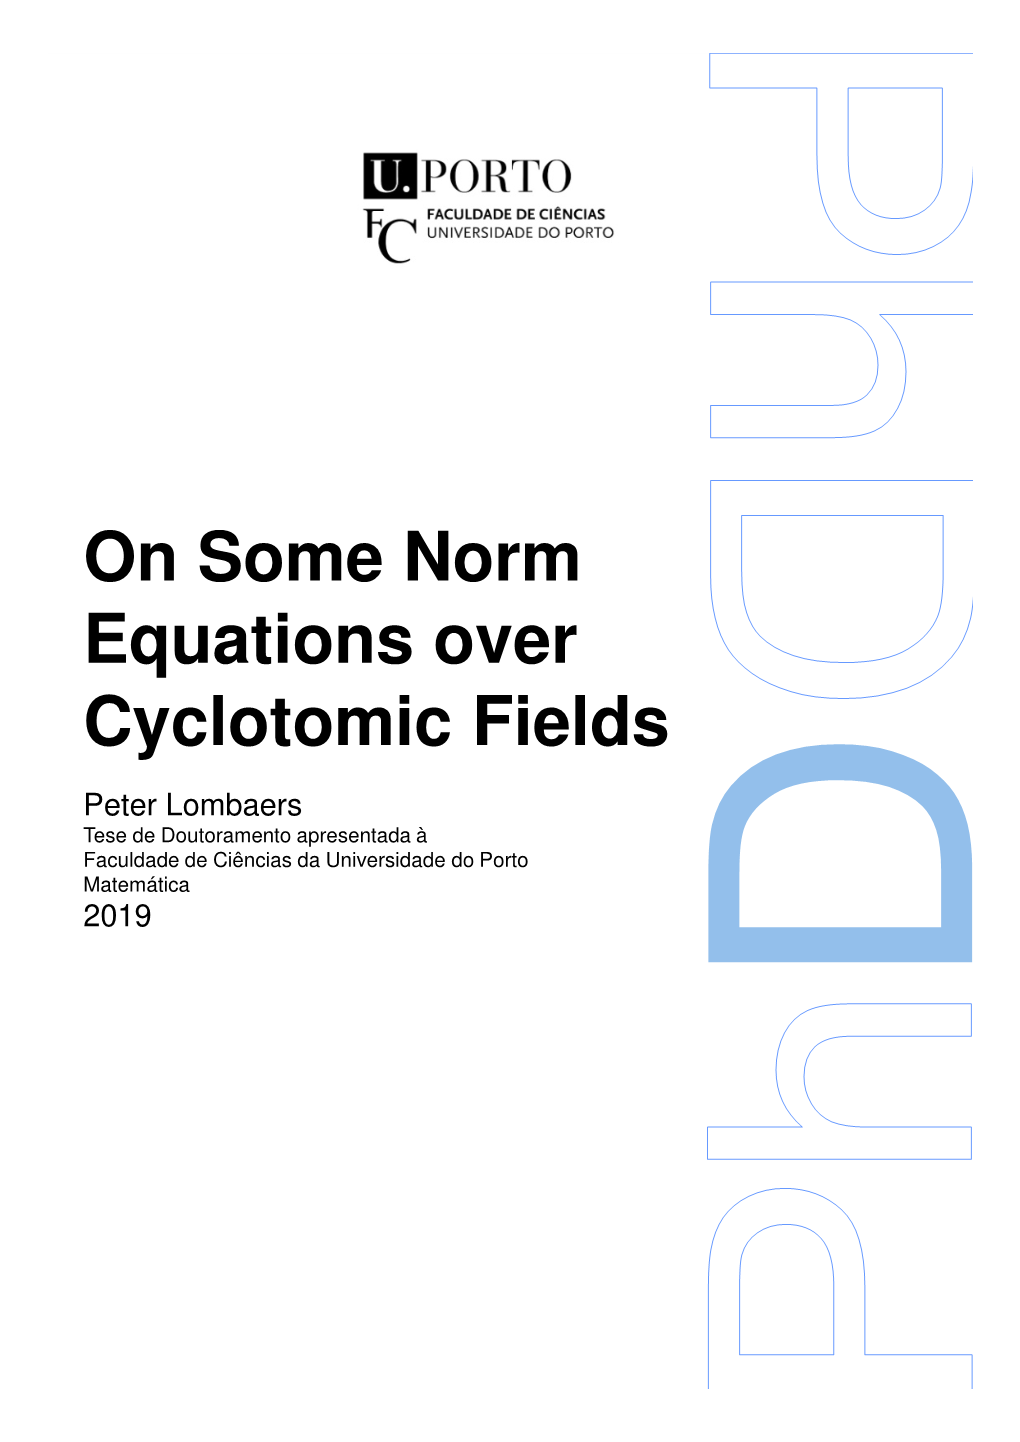 On Some Norm Equations Over Cyclotomic Fields